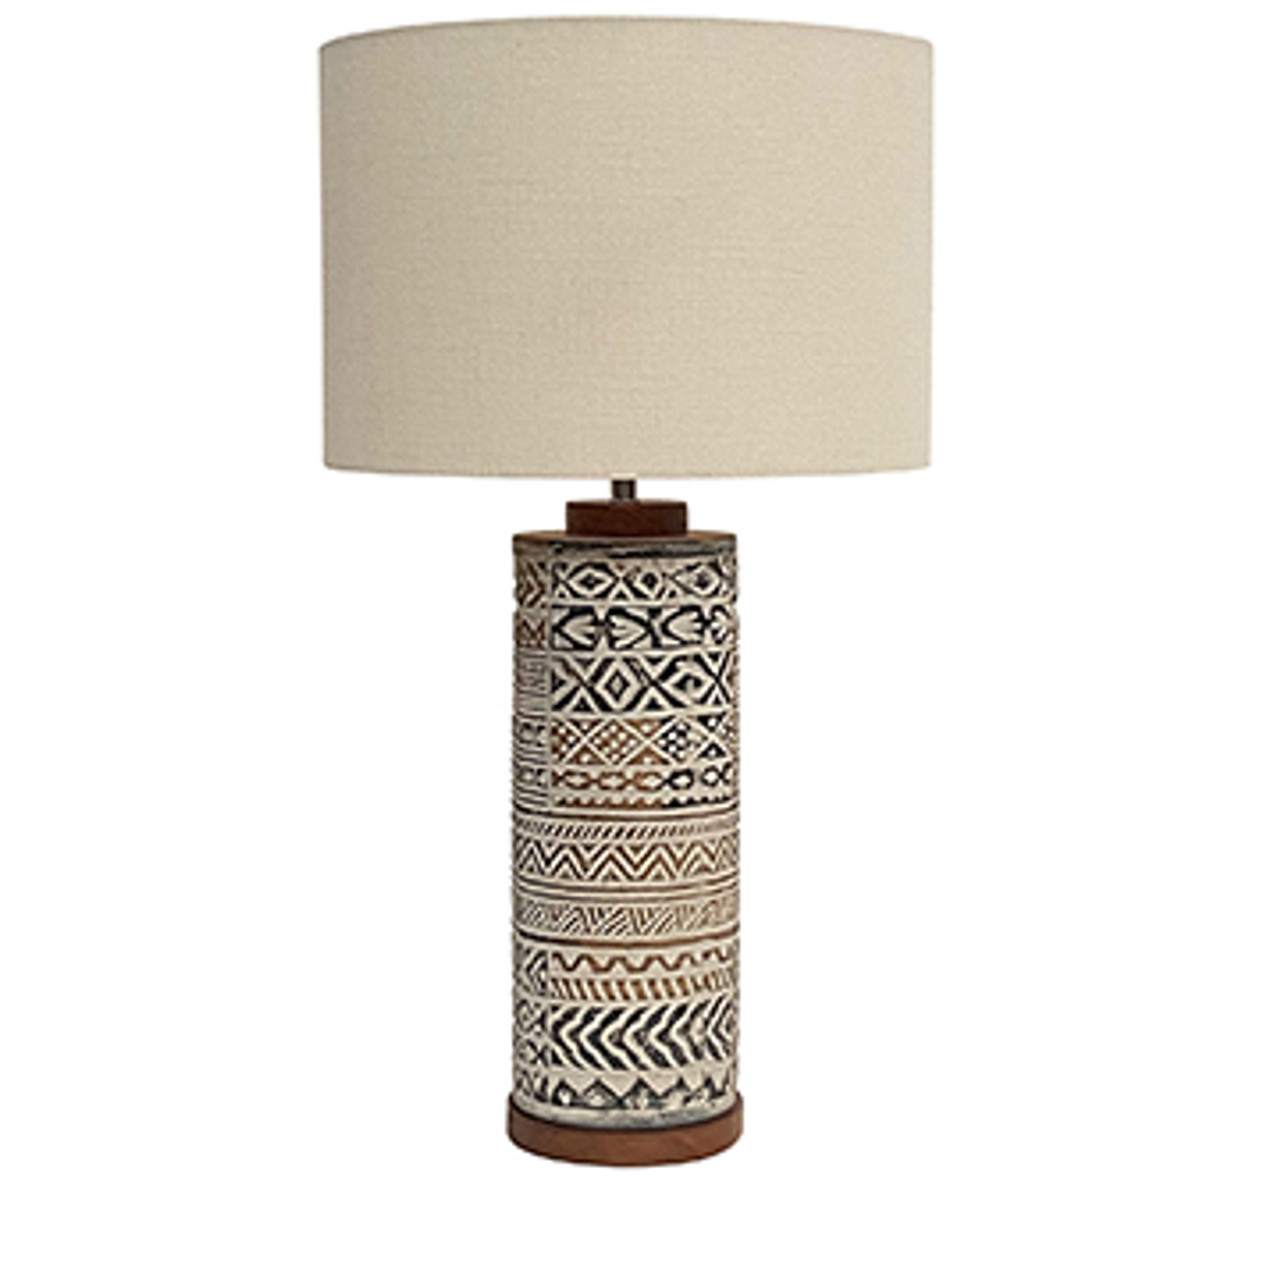 CRESTVIEW COLLECTION CVIDZA064 Taos Carved Table Lamp